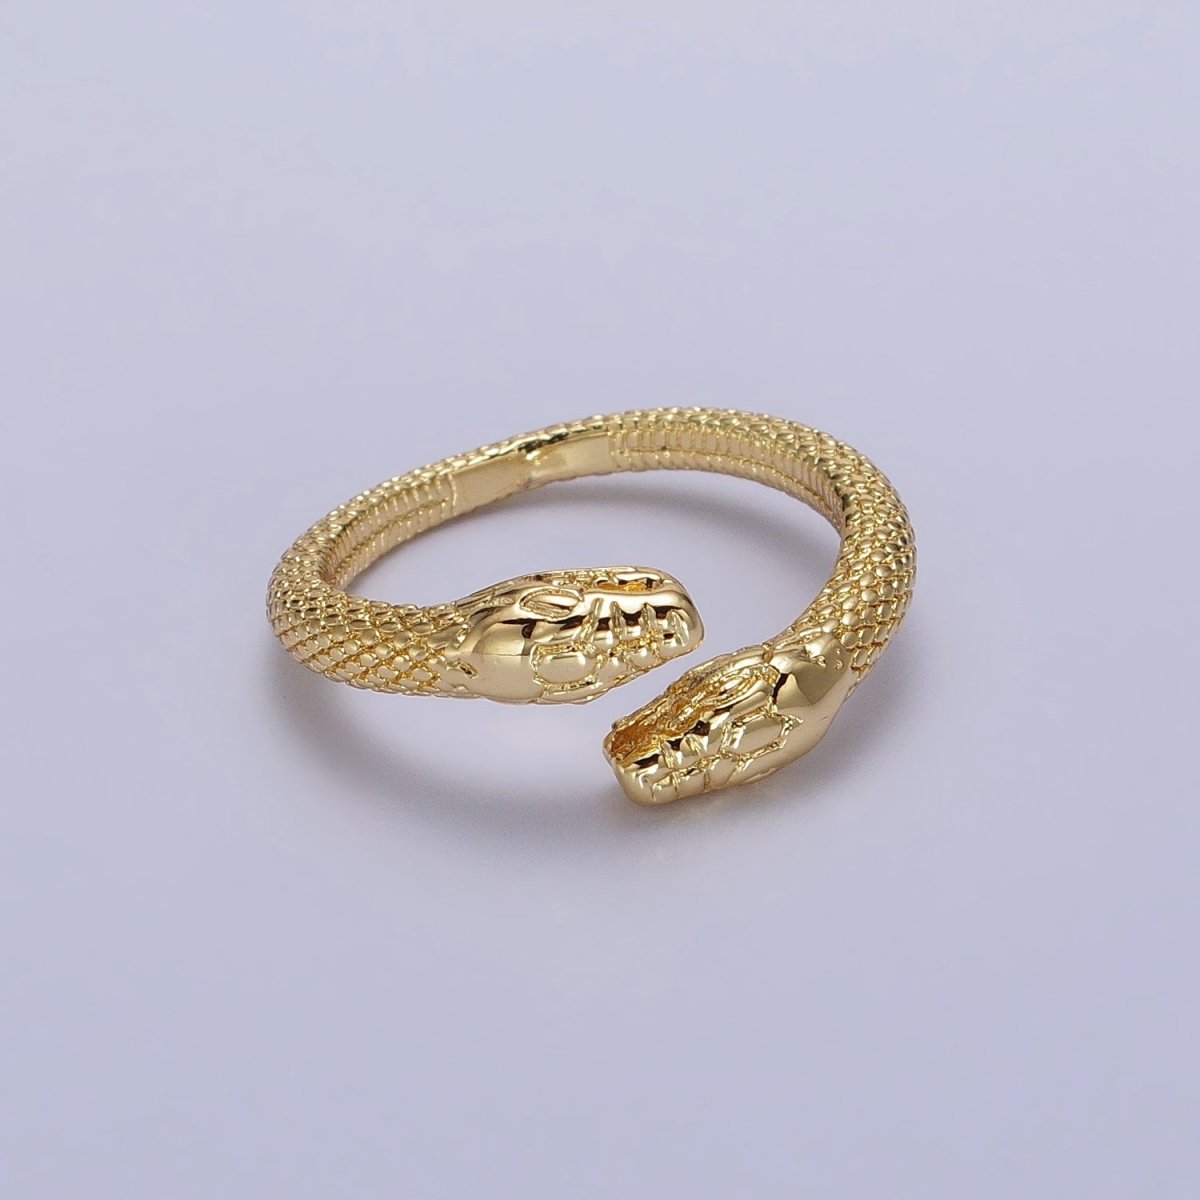 Dainty Gold Snake Ring, Adjustable Serpent Rings for Women Y-569 - DLUXCA